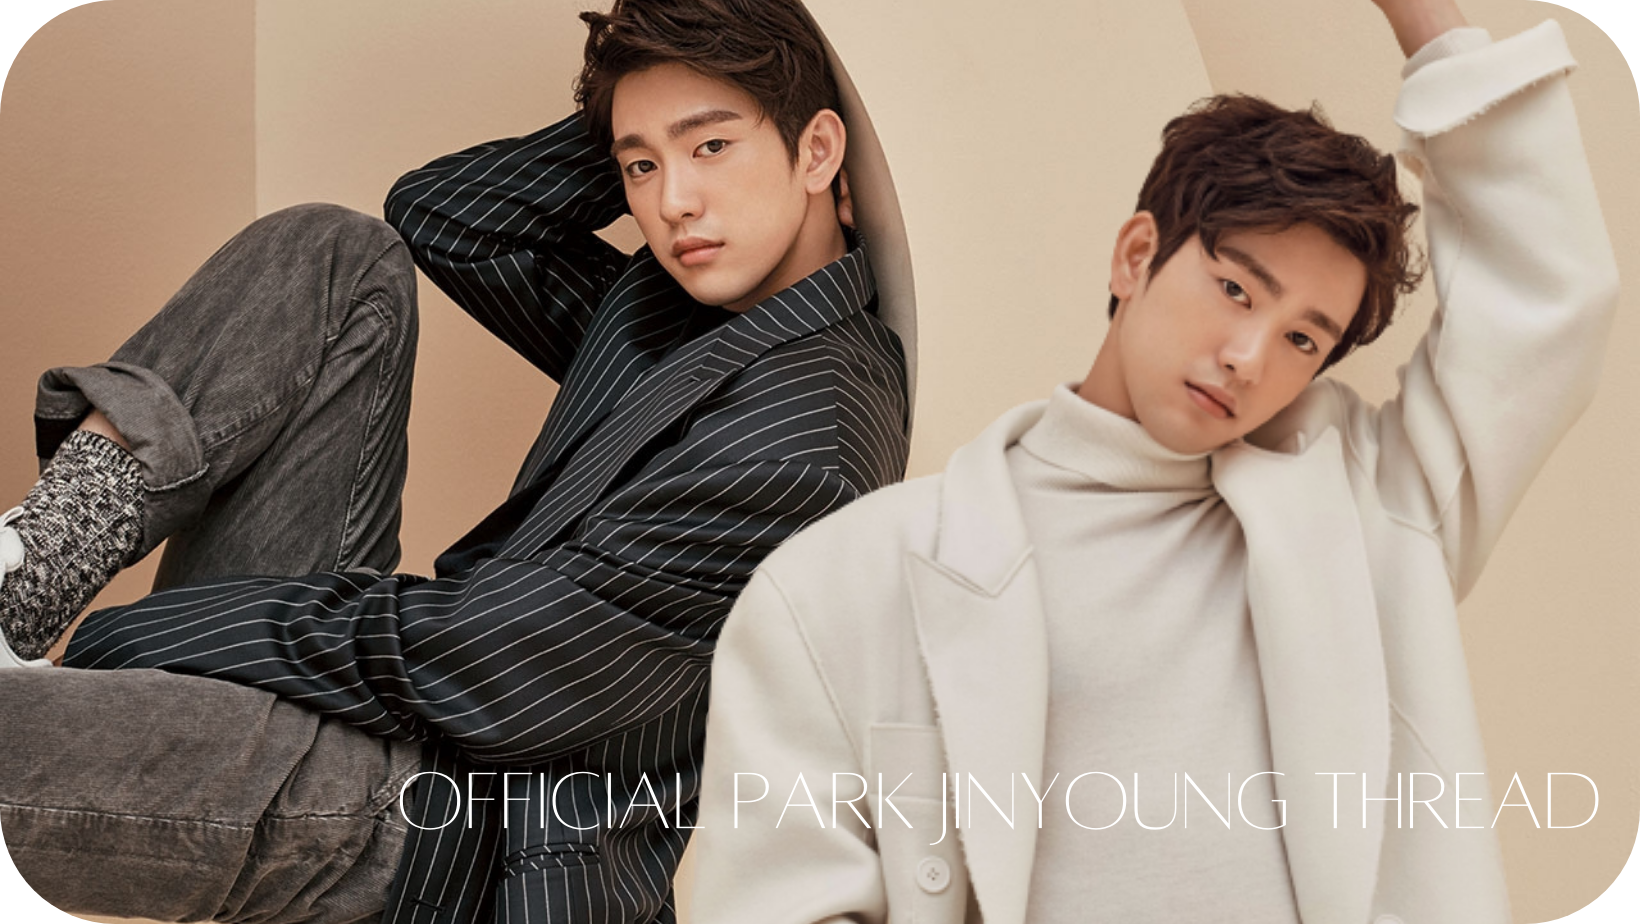 Official Park Jinyoung Thread (1).png